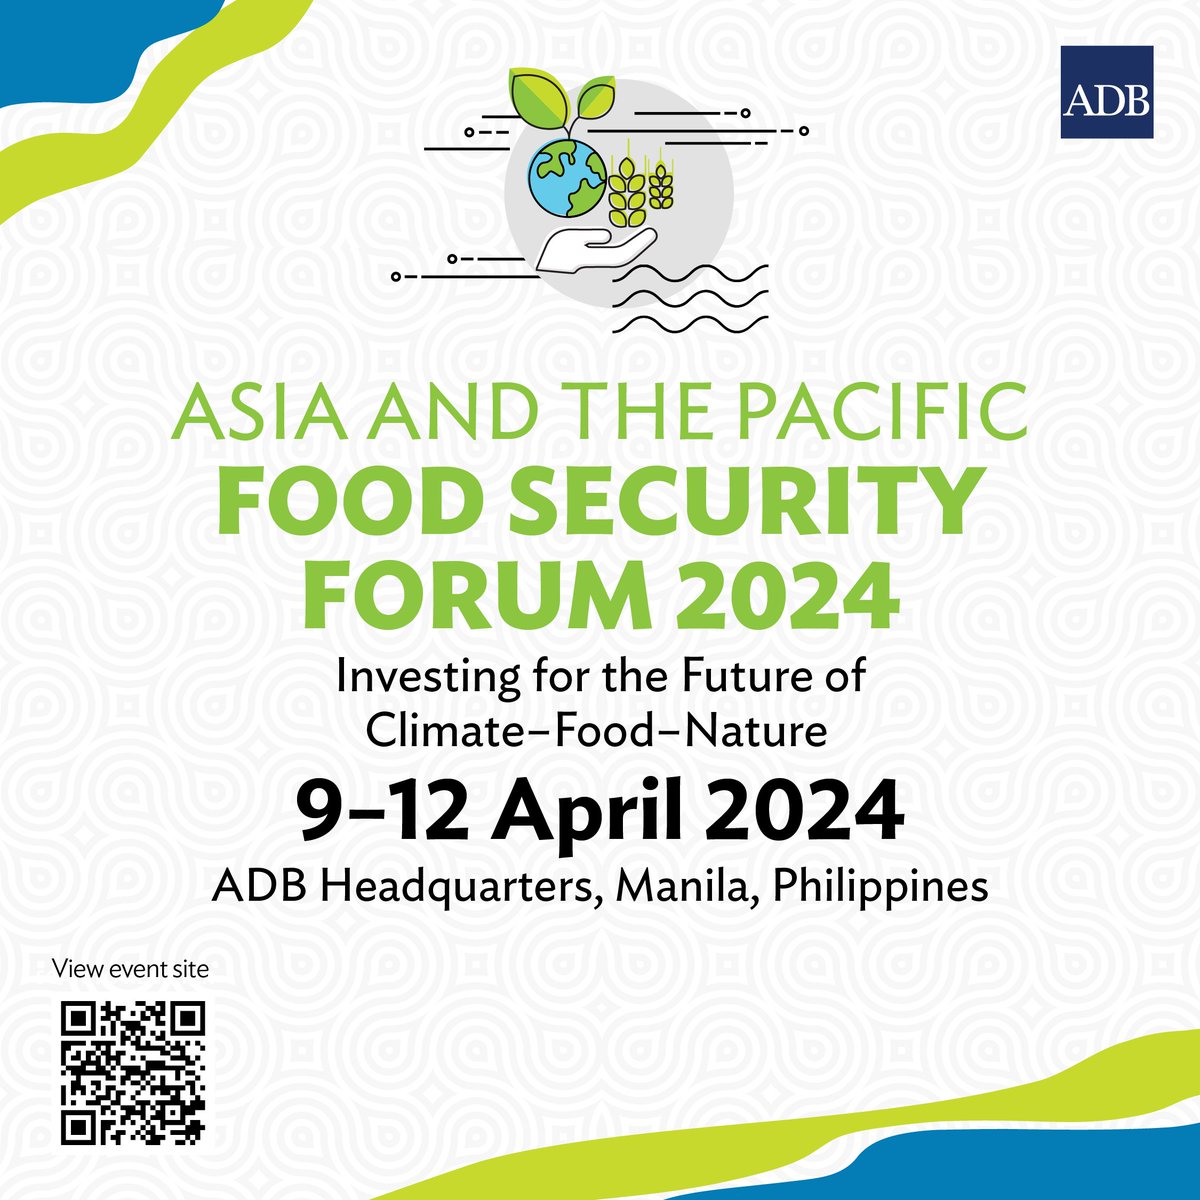 #GAFSP’s Program Manager Elhadji Adama Touré will join a panel discussion on strengthening partnerships to accelerate the food system transformation in Asia and the Pacific. Discover more: foodsecurityforum.adb.org/sessions/sessi… #ADBFoodSecurity24

📷: @ADB_HQ